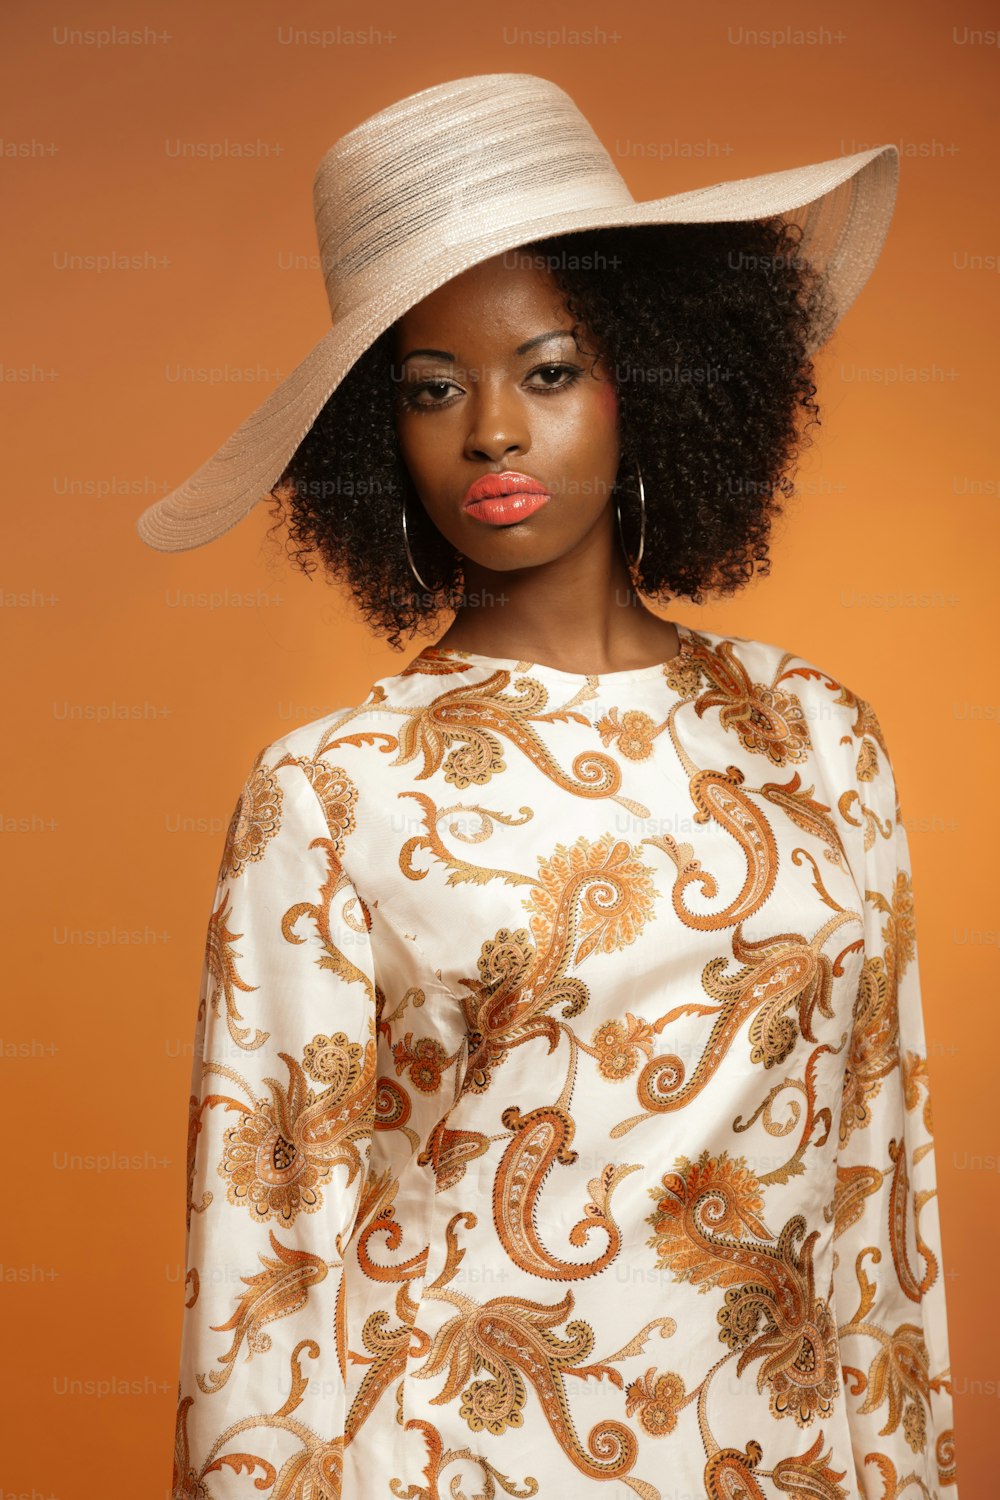 Retro 70s fashion afro woman with paisley dress and white hat. Brown background.